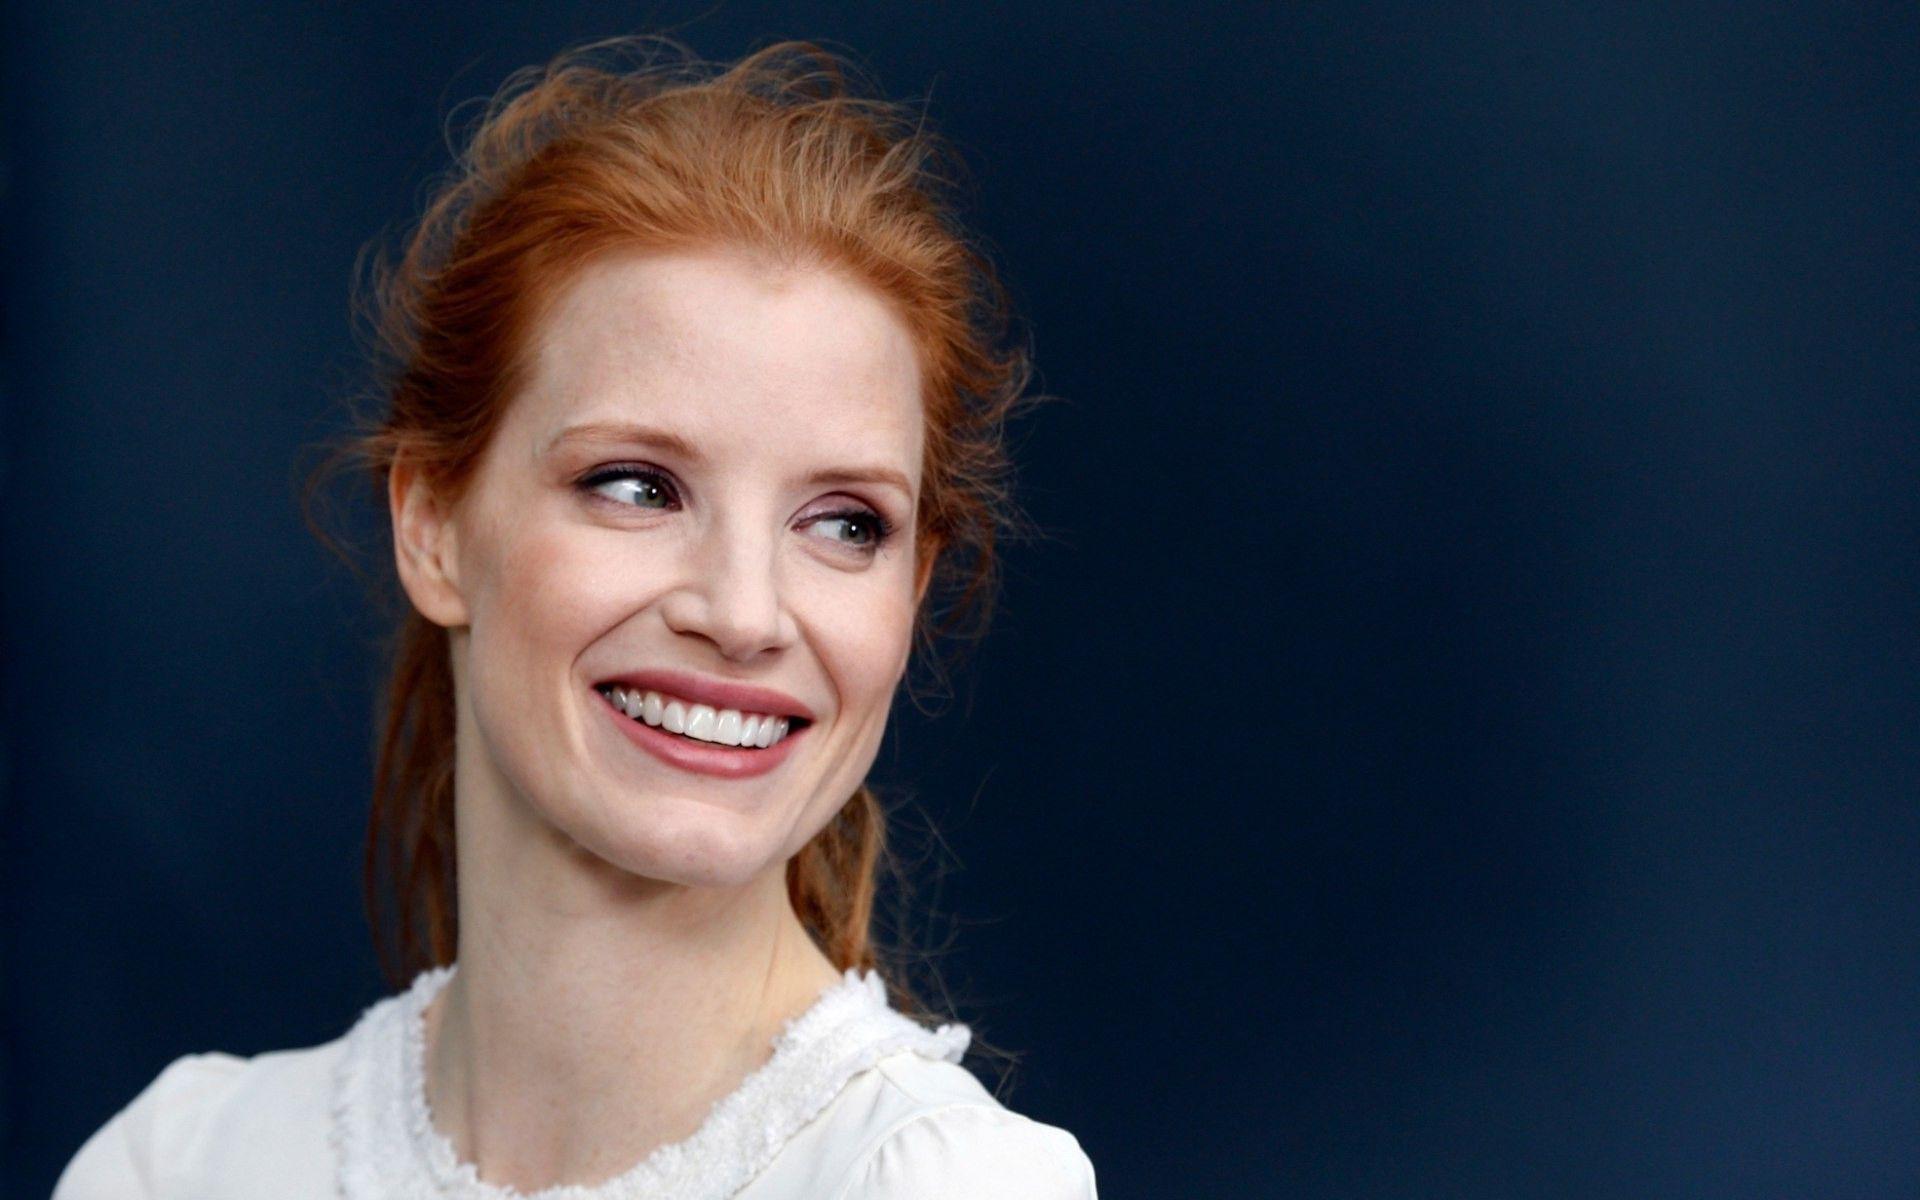 Jessica Chastain Wallpaper High Quality